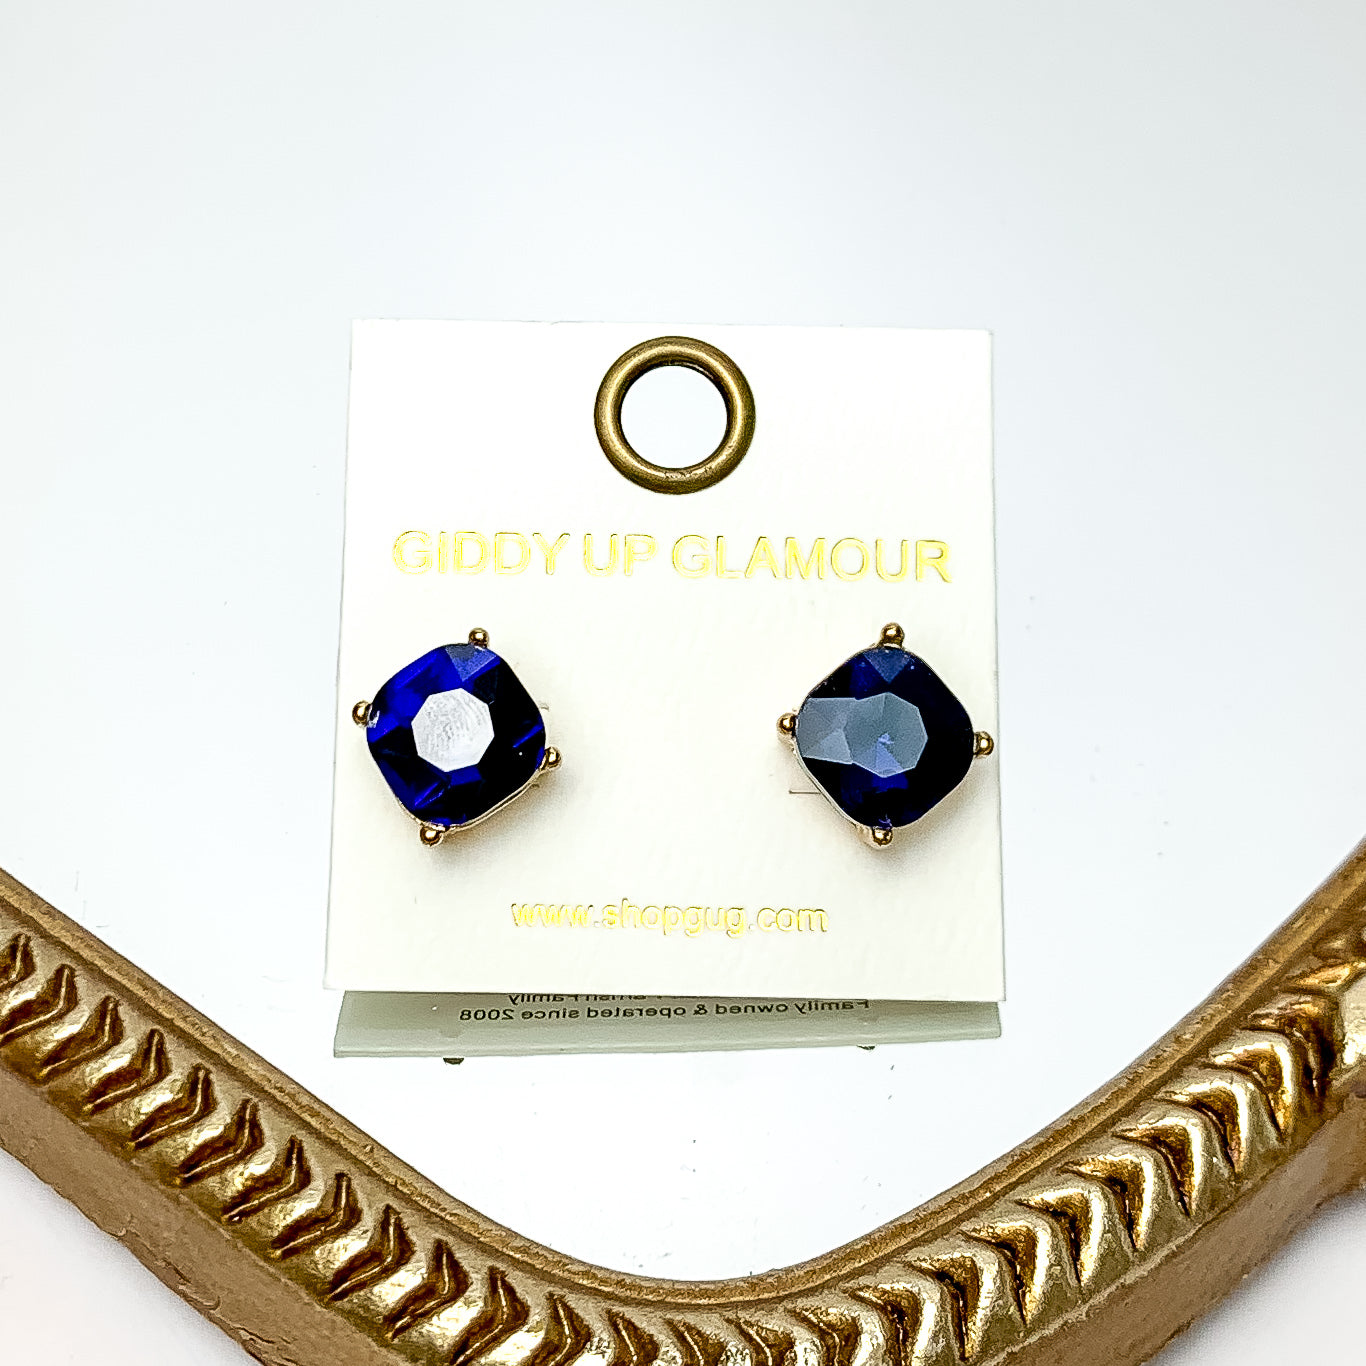 Large Crystal Stud Earrings in Navy Blue. These earrings are pictured laying on a gold trimmed mirror. 